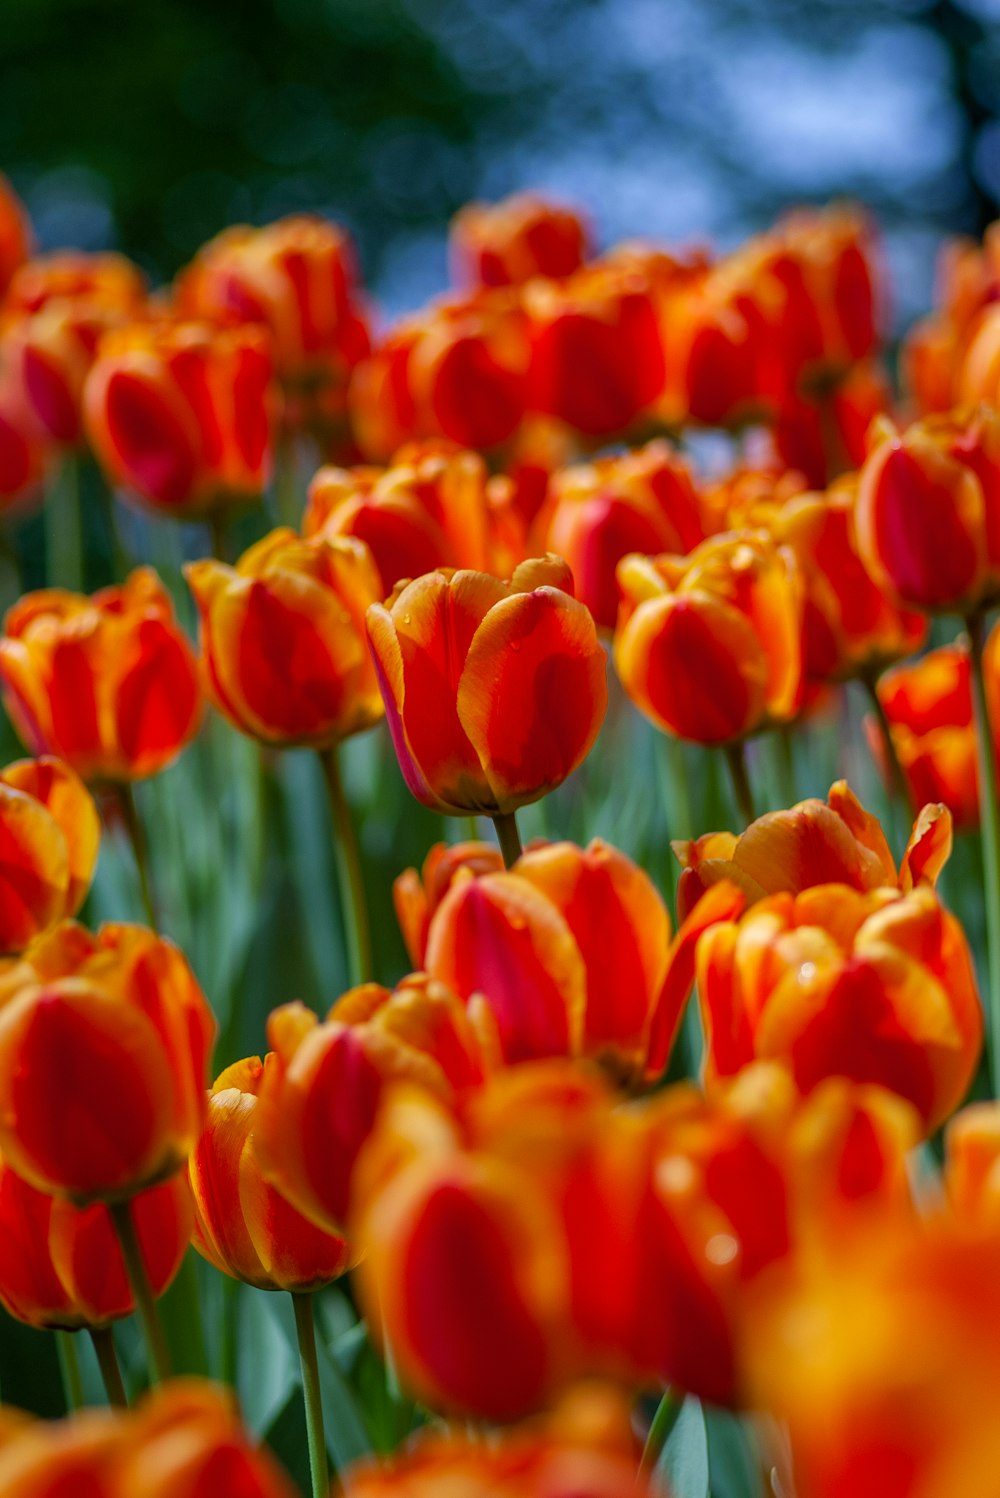 red-and-orange Tulips